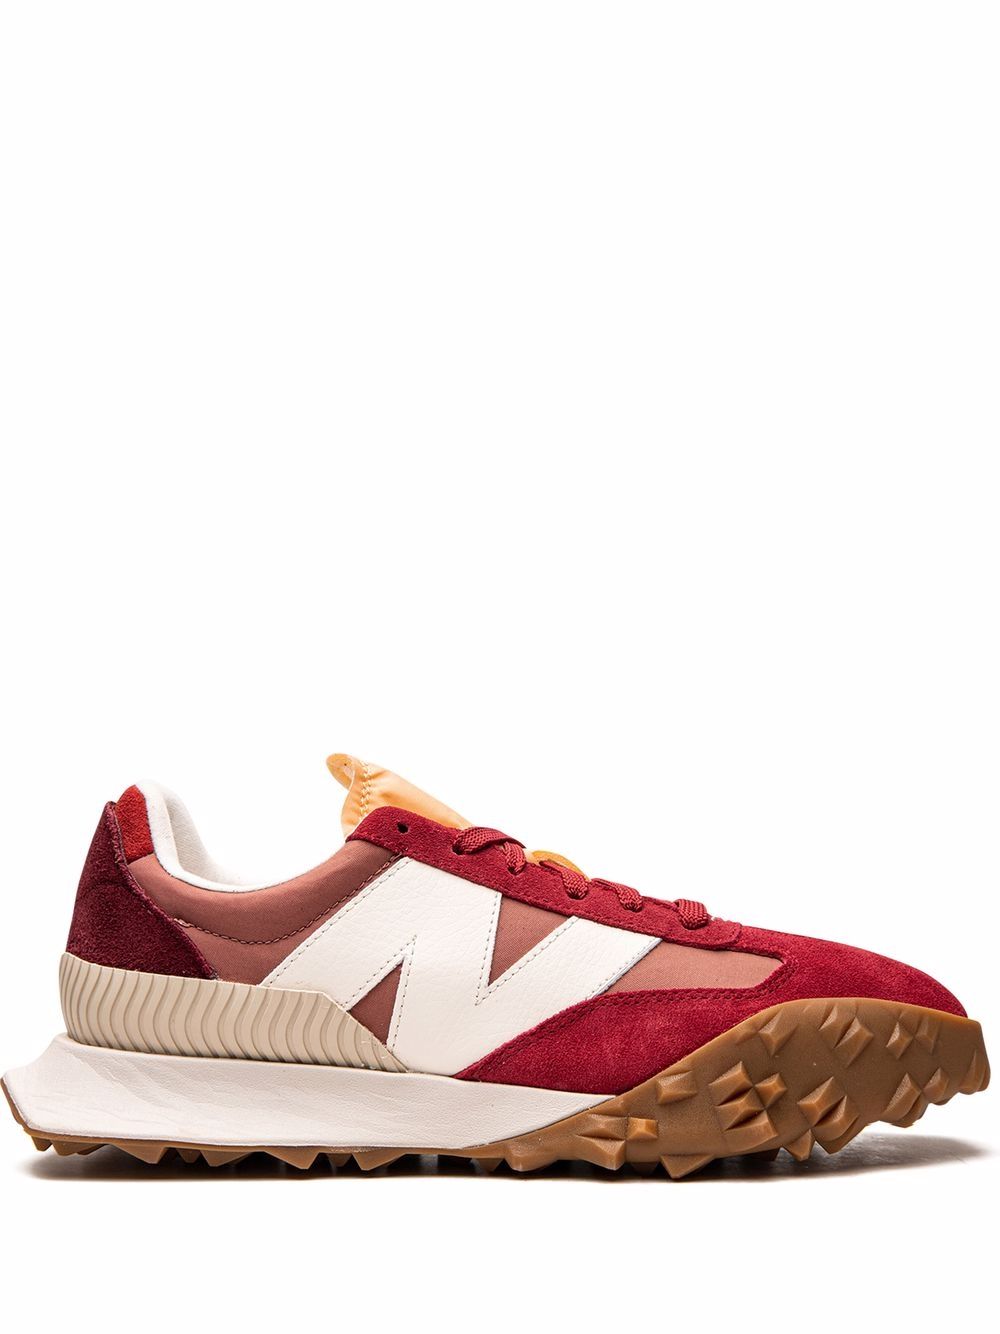 New Balance XC72 "Washed Henna" sneakers - Red von New Balance